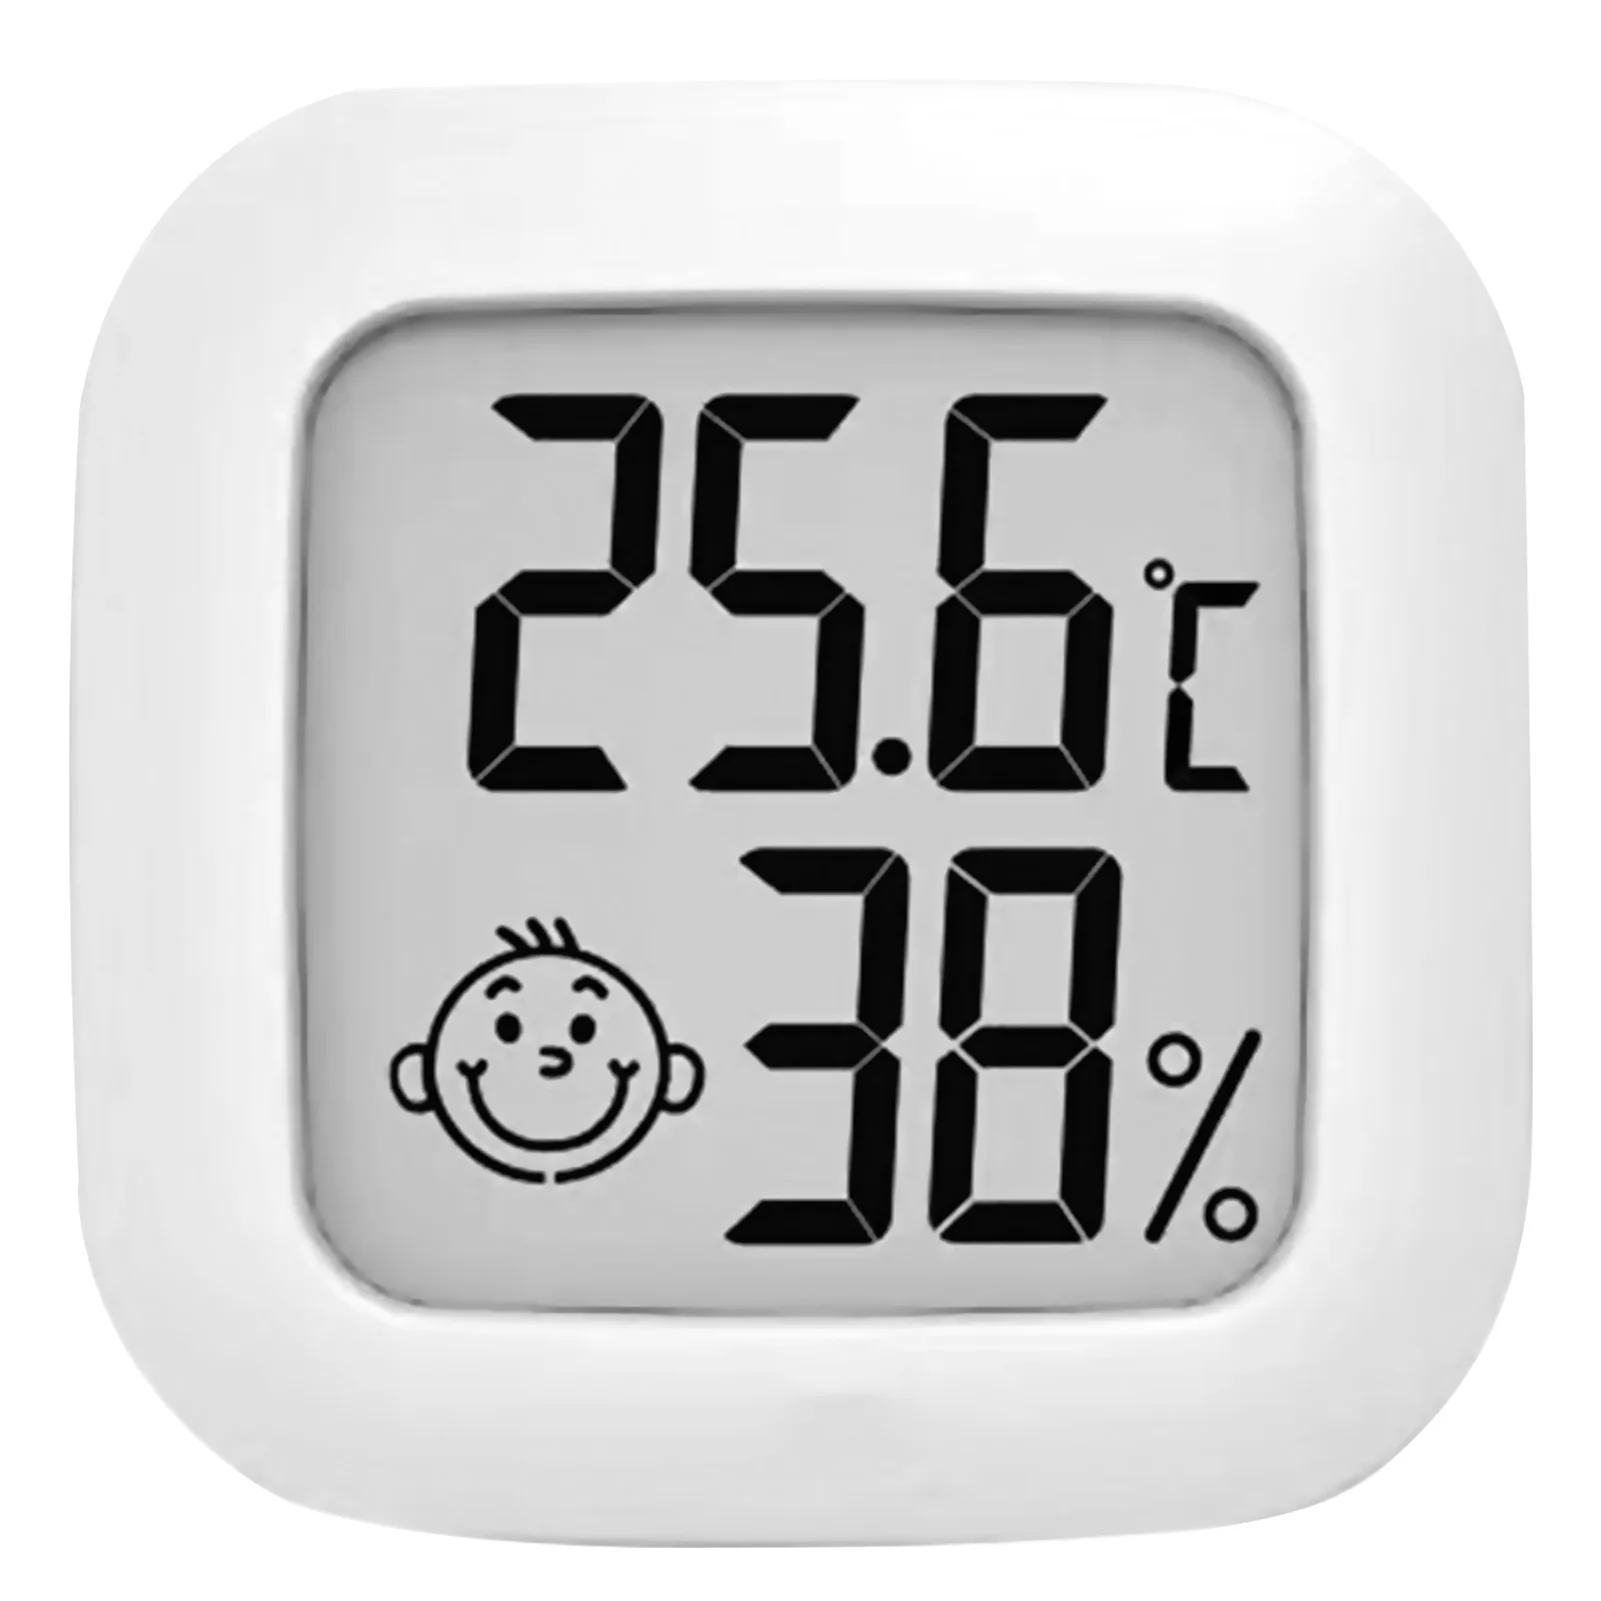 https://ae01.alicdn.com/kf/Se5762fd506ef45698f3cc5650e47a458i/Digital-Hygrometer-Thermometer-Indoor-Humidity-Meter-with-Humidity-and-Temperature-Monitor-for-Home-Greenhouse-Office-School.jpg